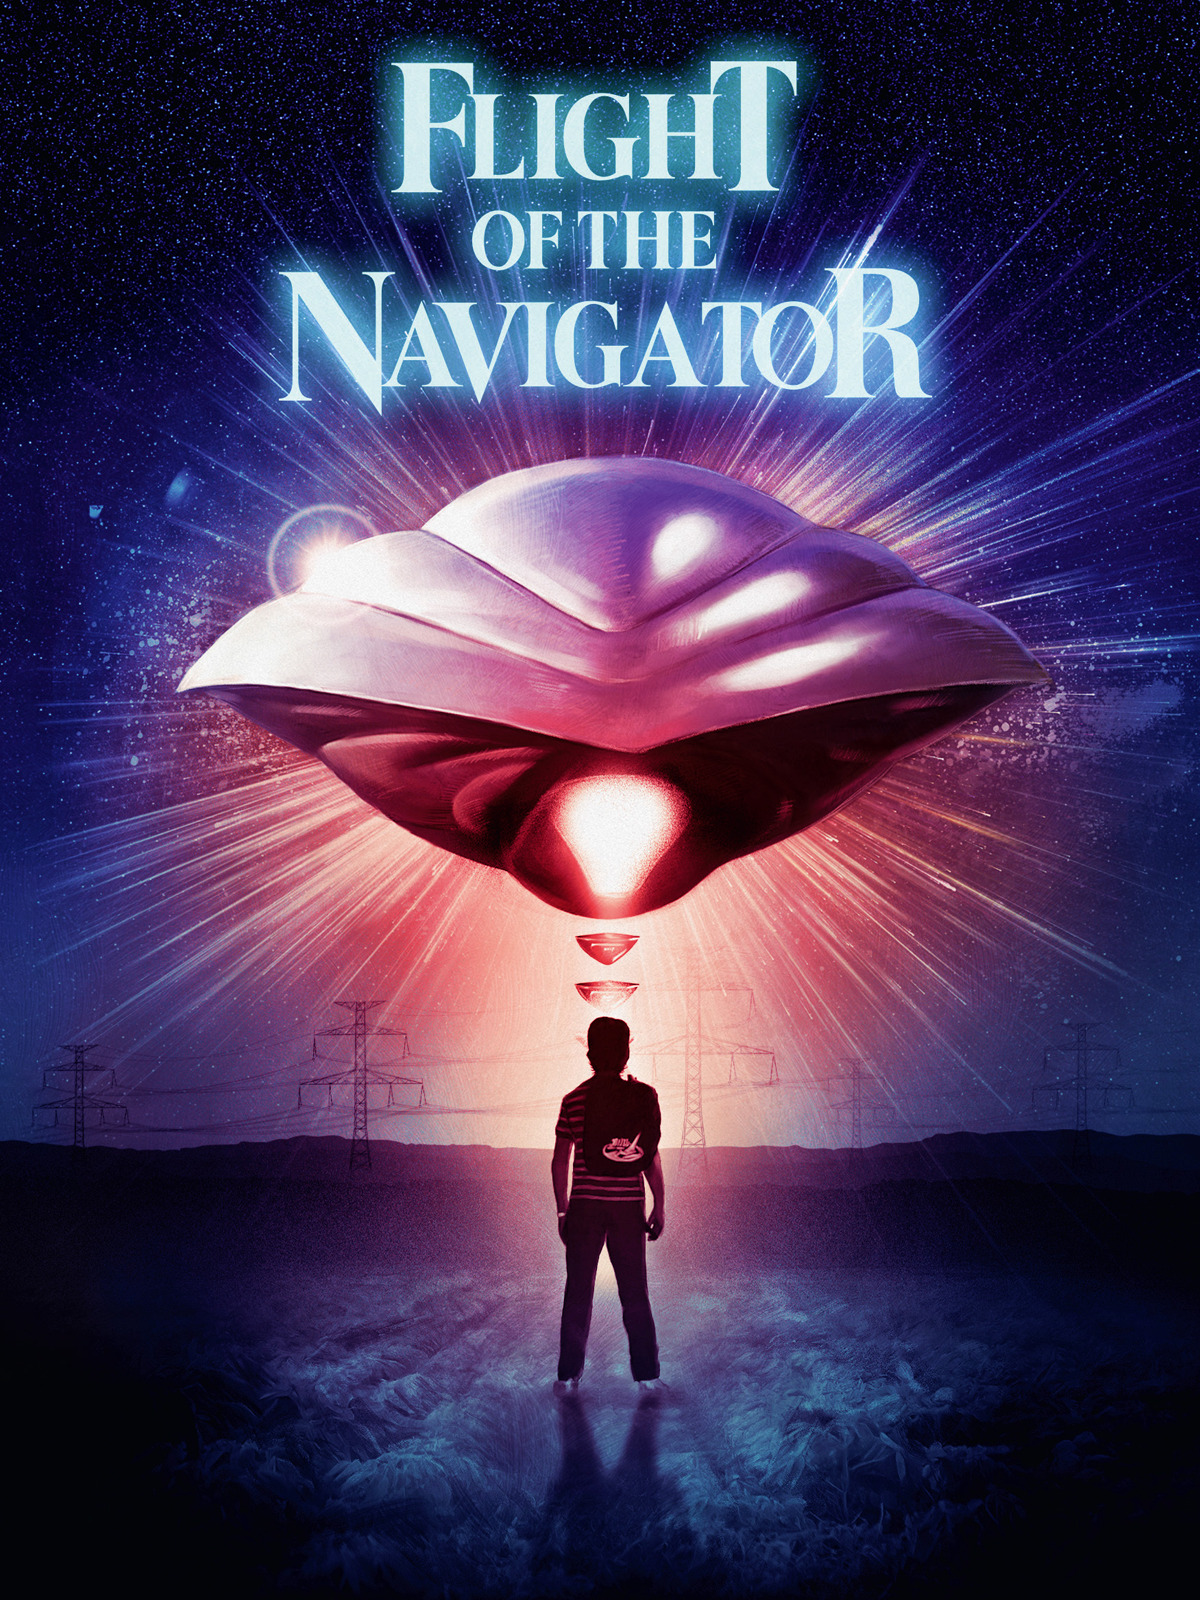 Disney Movie Flight of the Navigator From The 80s Getting Rebooted!